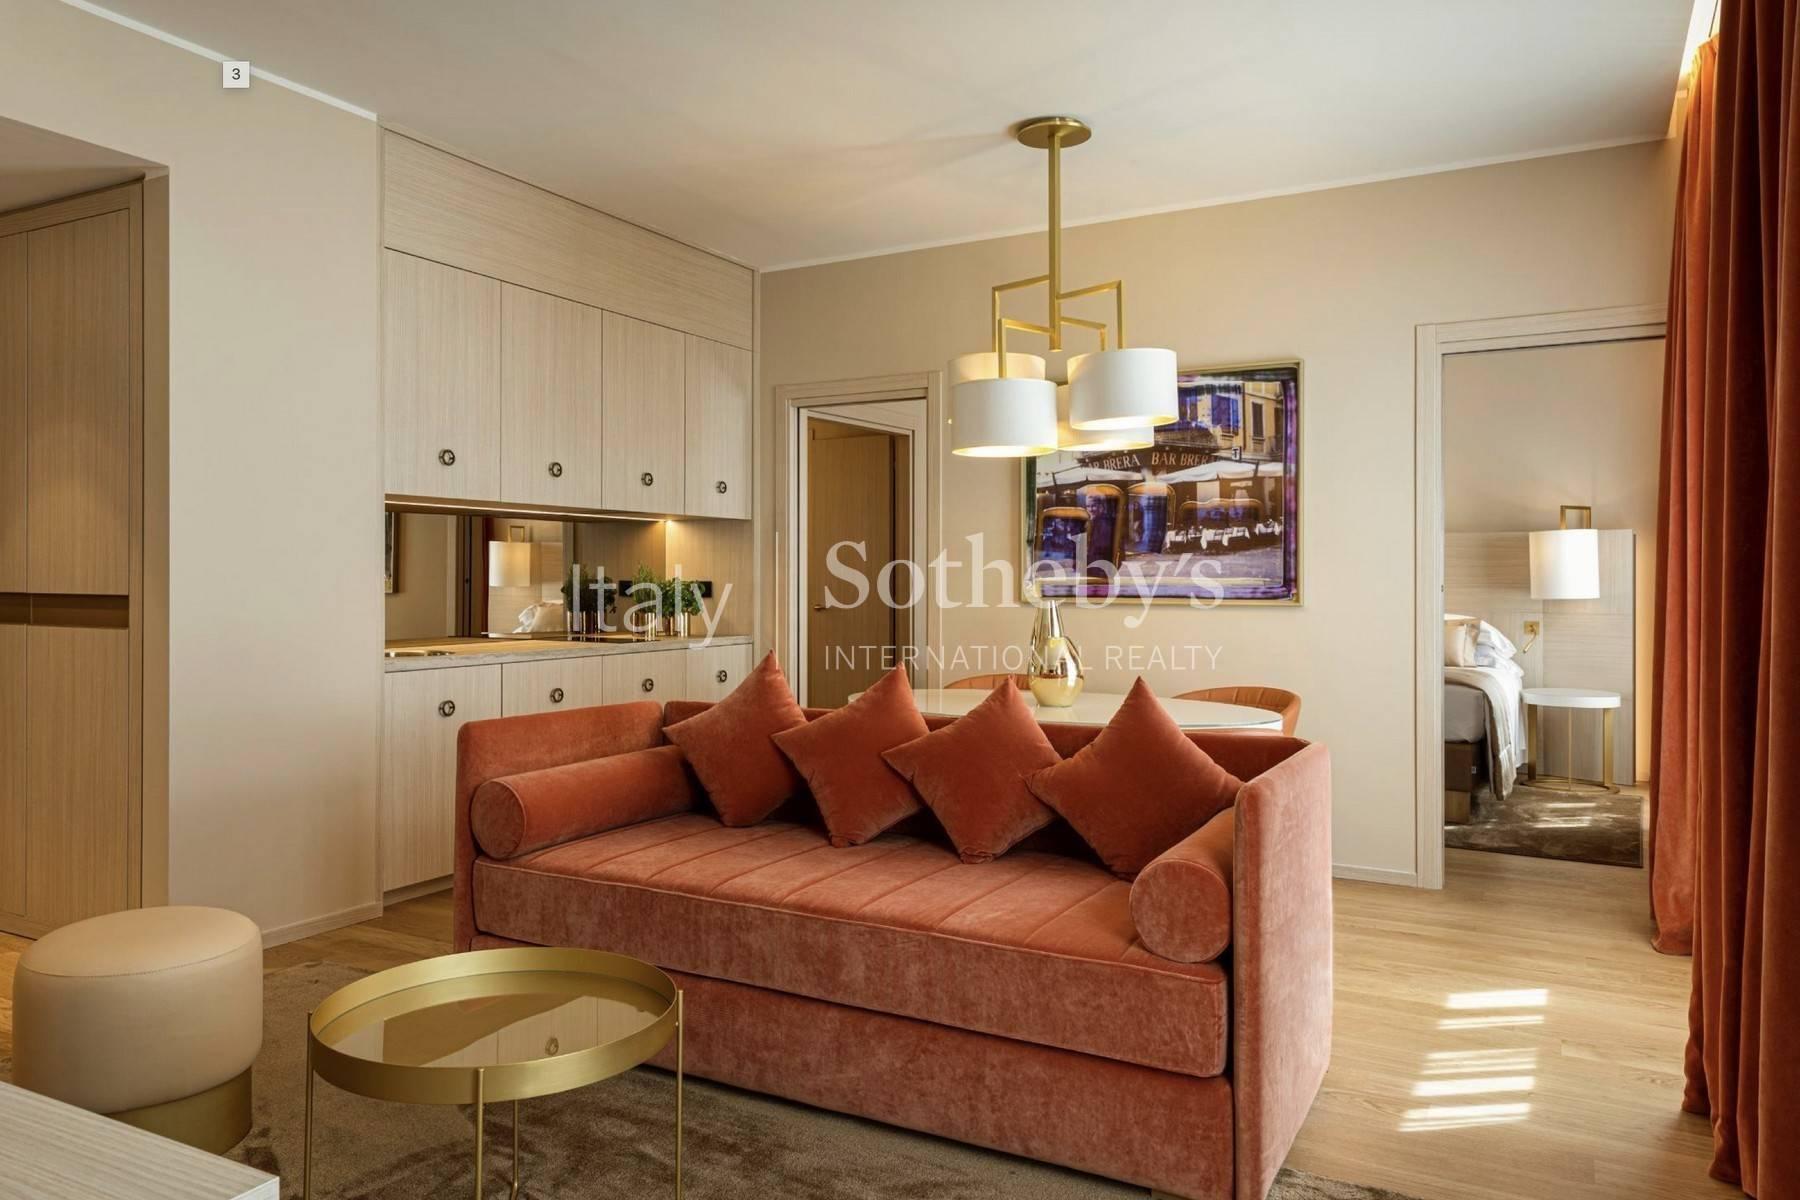 Apartments of various sizes in luxury hotel close to Piazza Duomo - 3